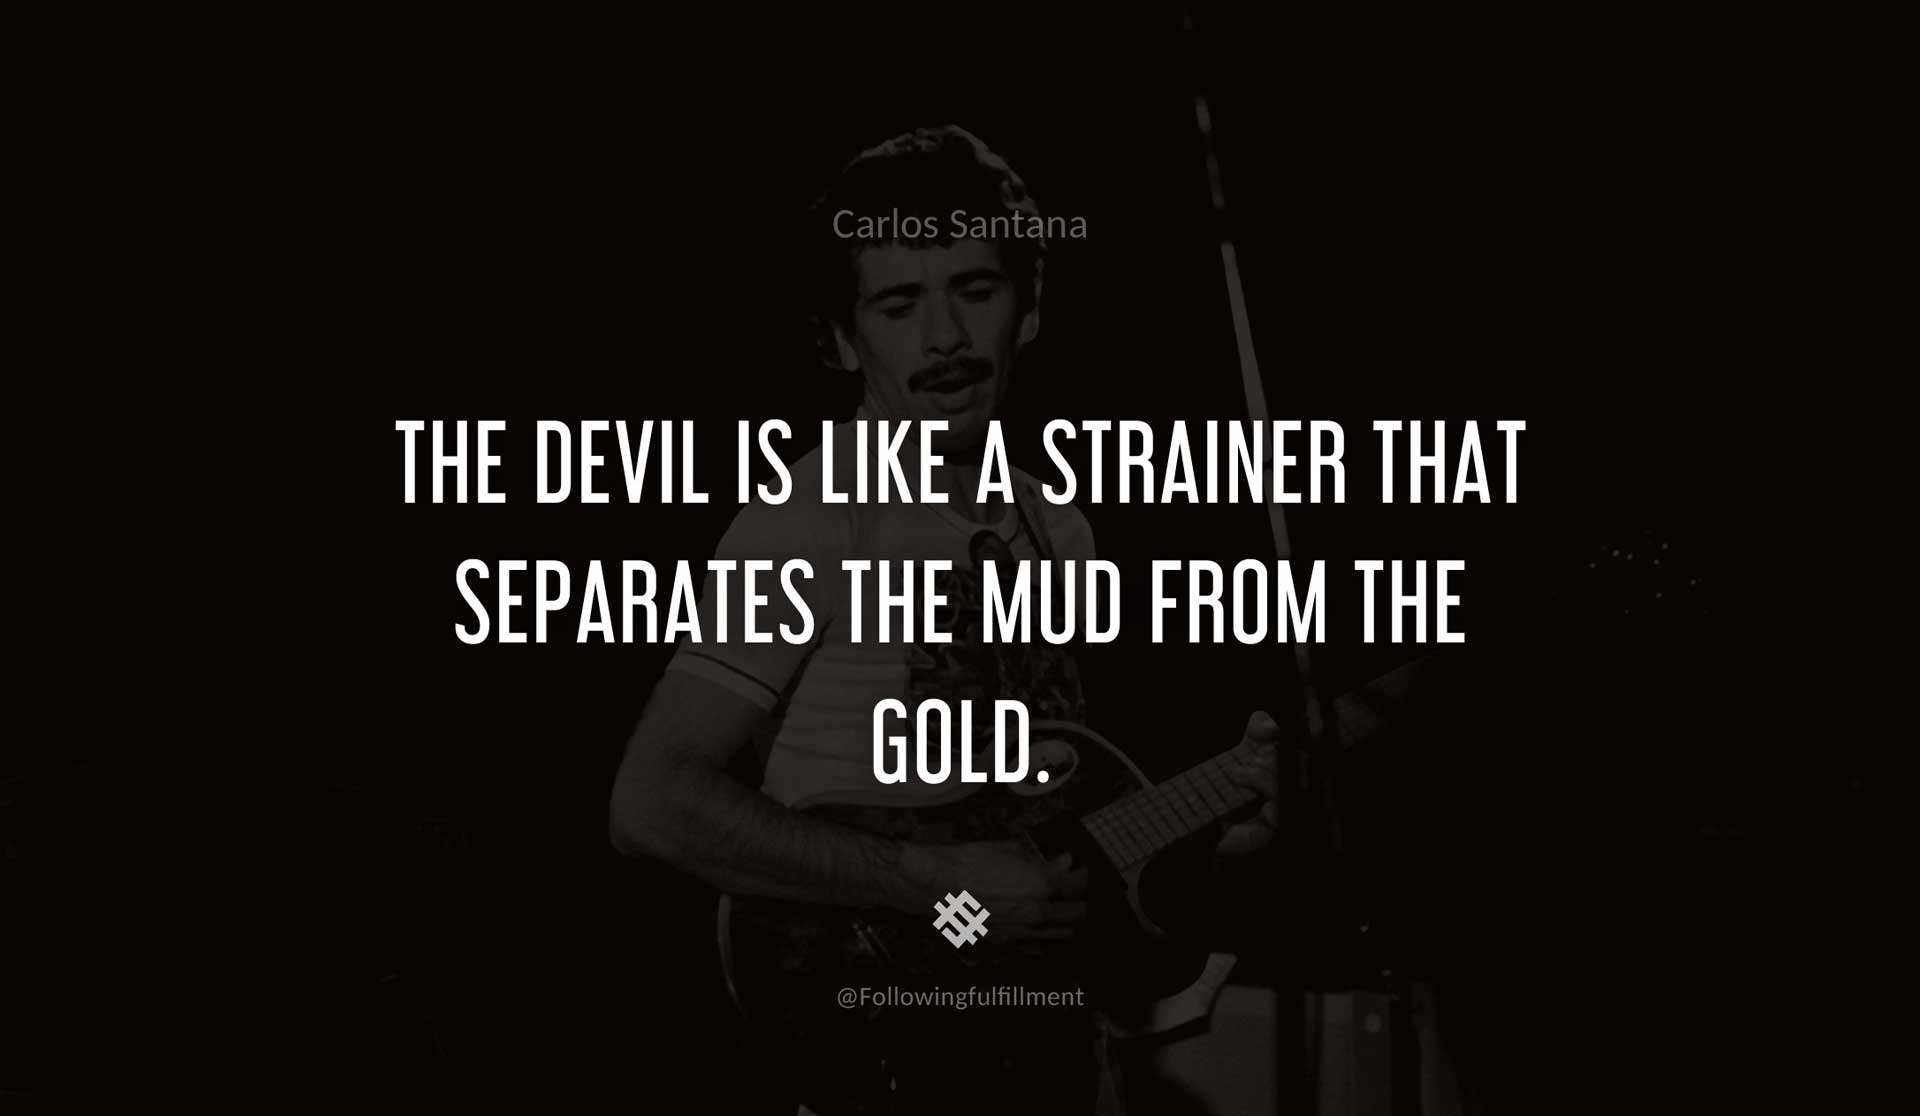 The-Devil-is-like-a-strainer-that-separates-the-mud-from-the-gold.-CARLOS-SANTANA-Quote.jpg